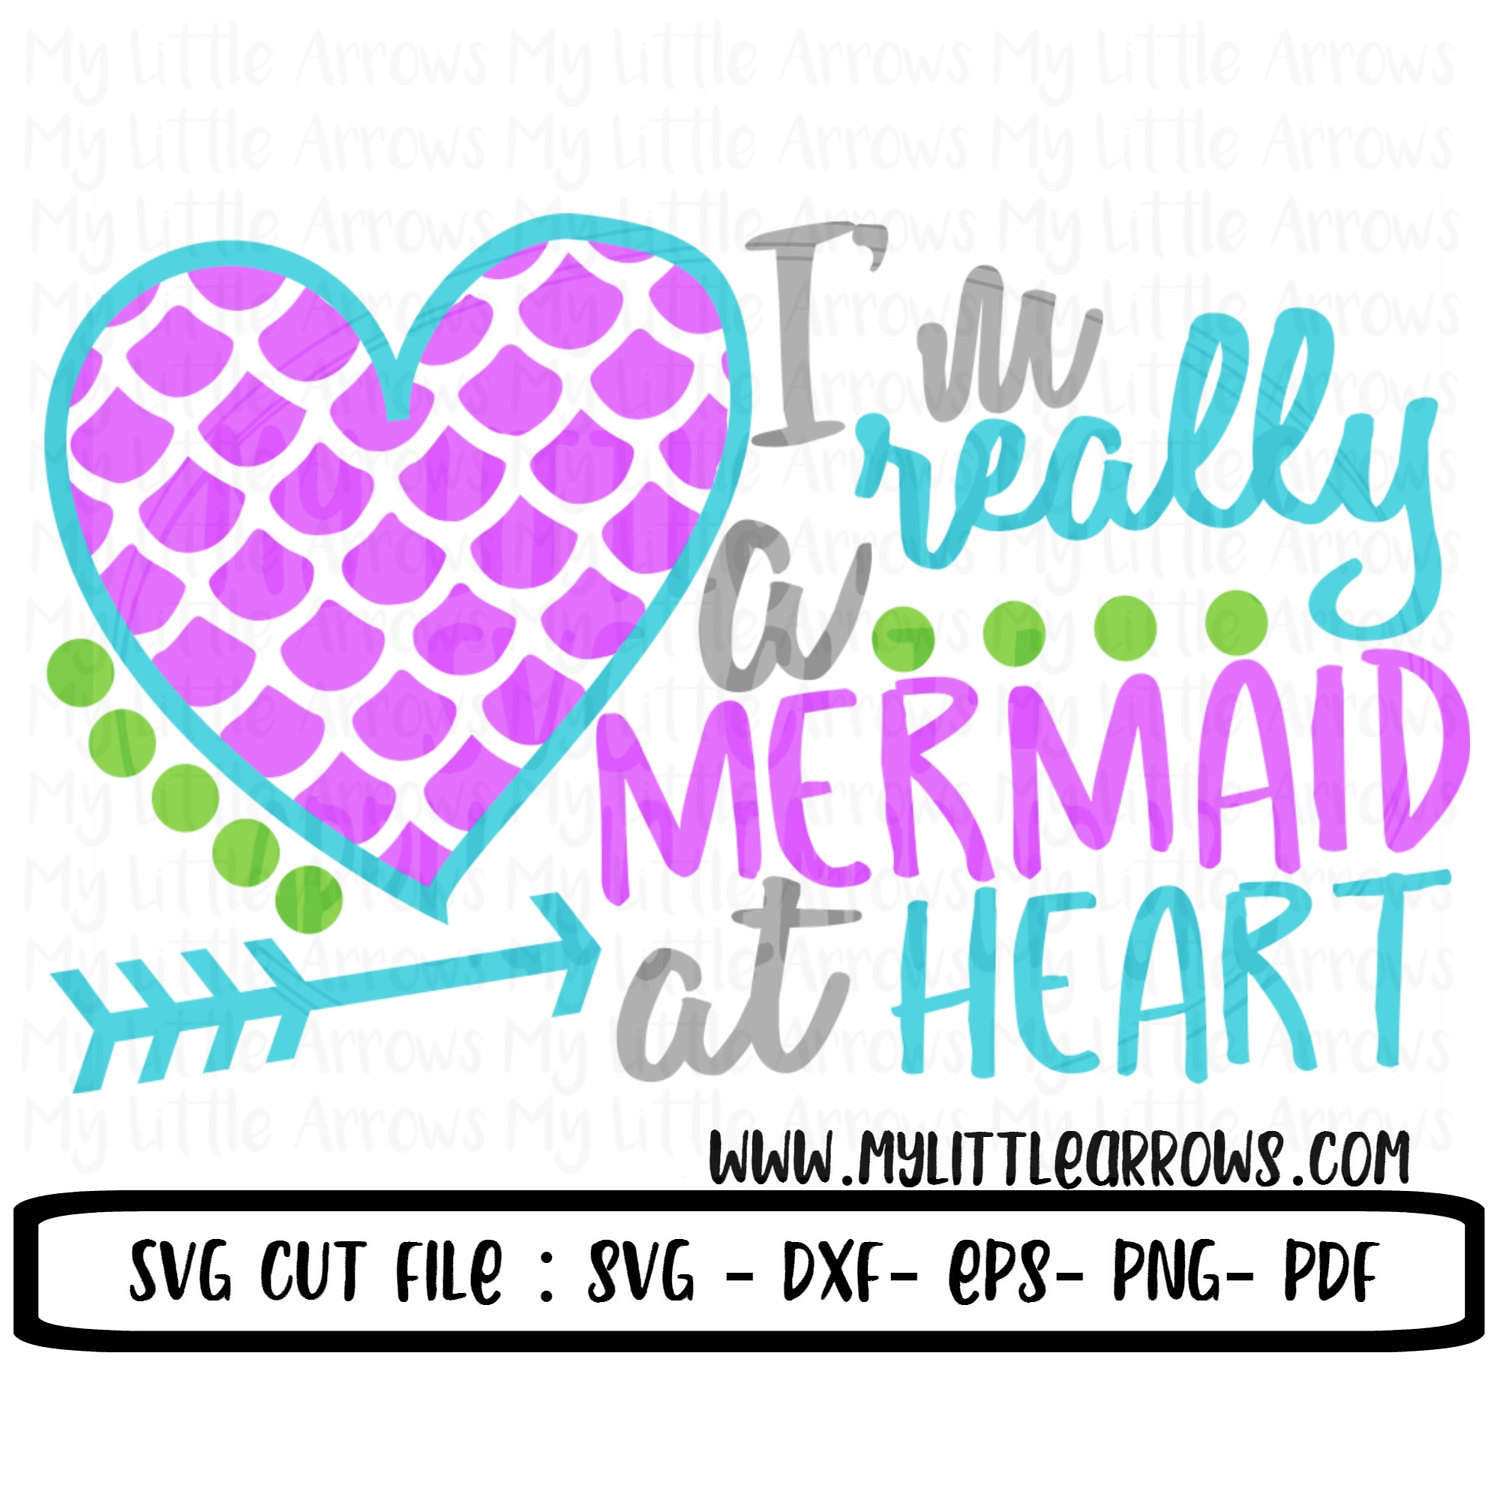 Im really a mermaid at heart SVG DXF EPS png Files